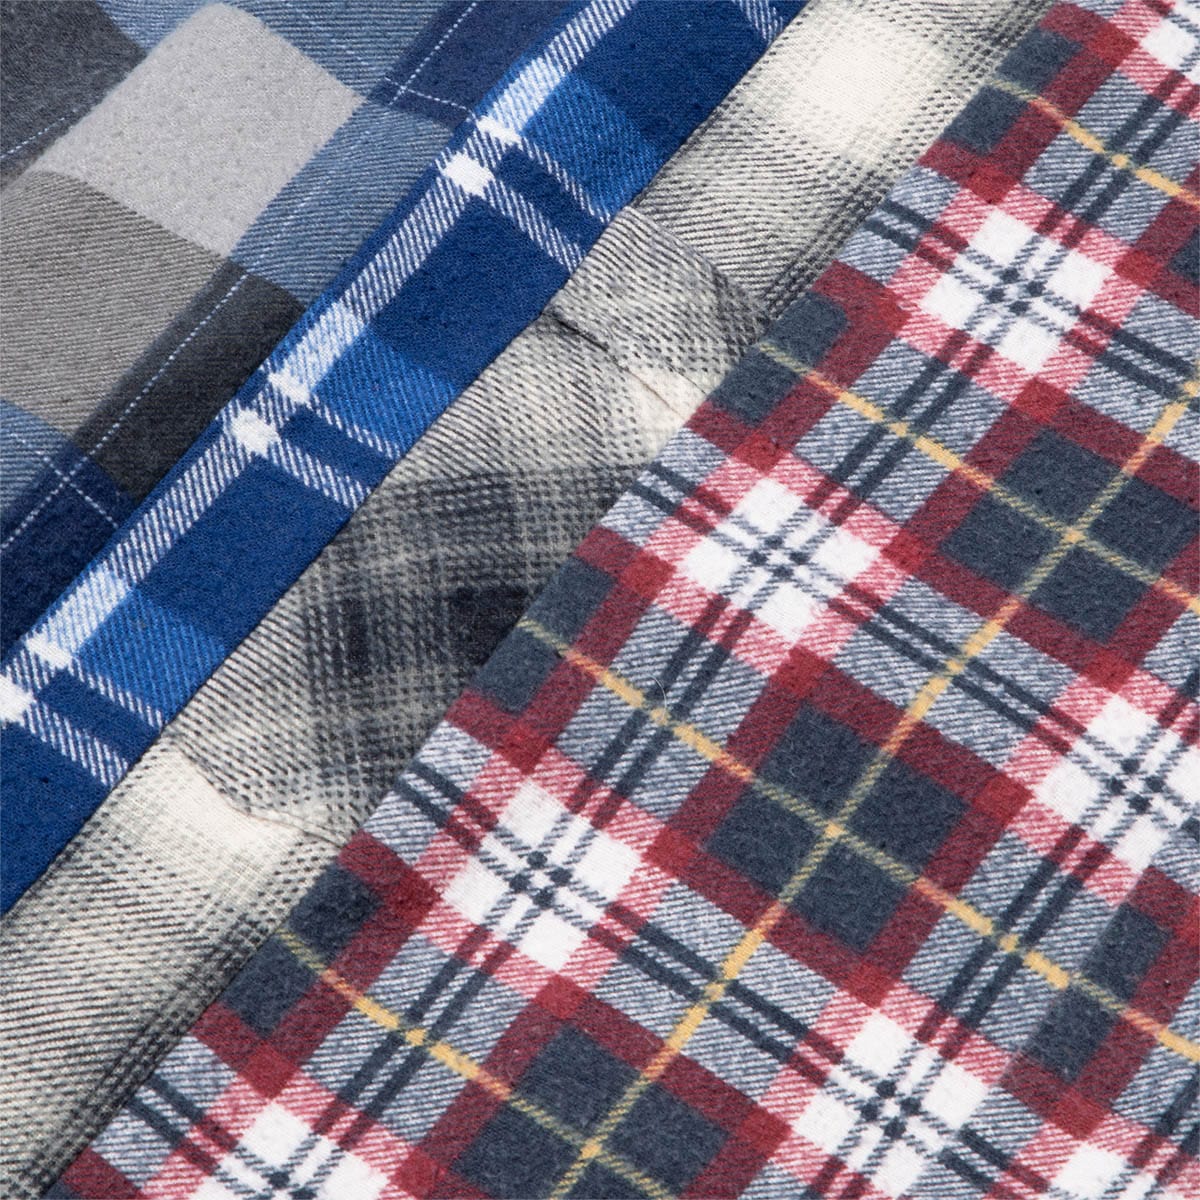 Needles Shirts ASSORTED / M 7 CUTS FLANNEL SHIRT SS21 5